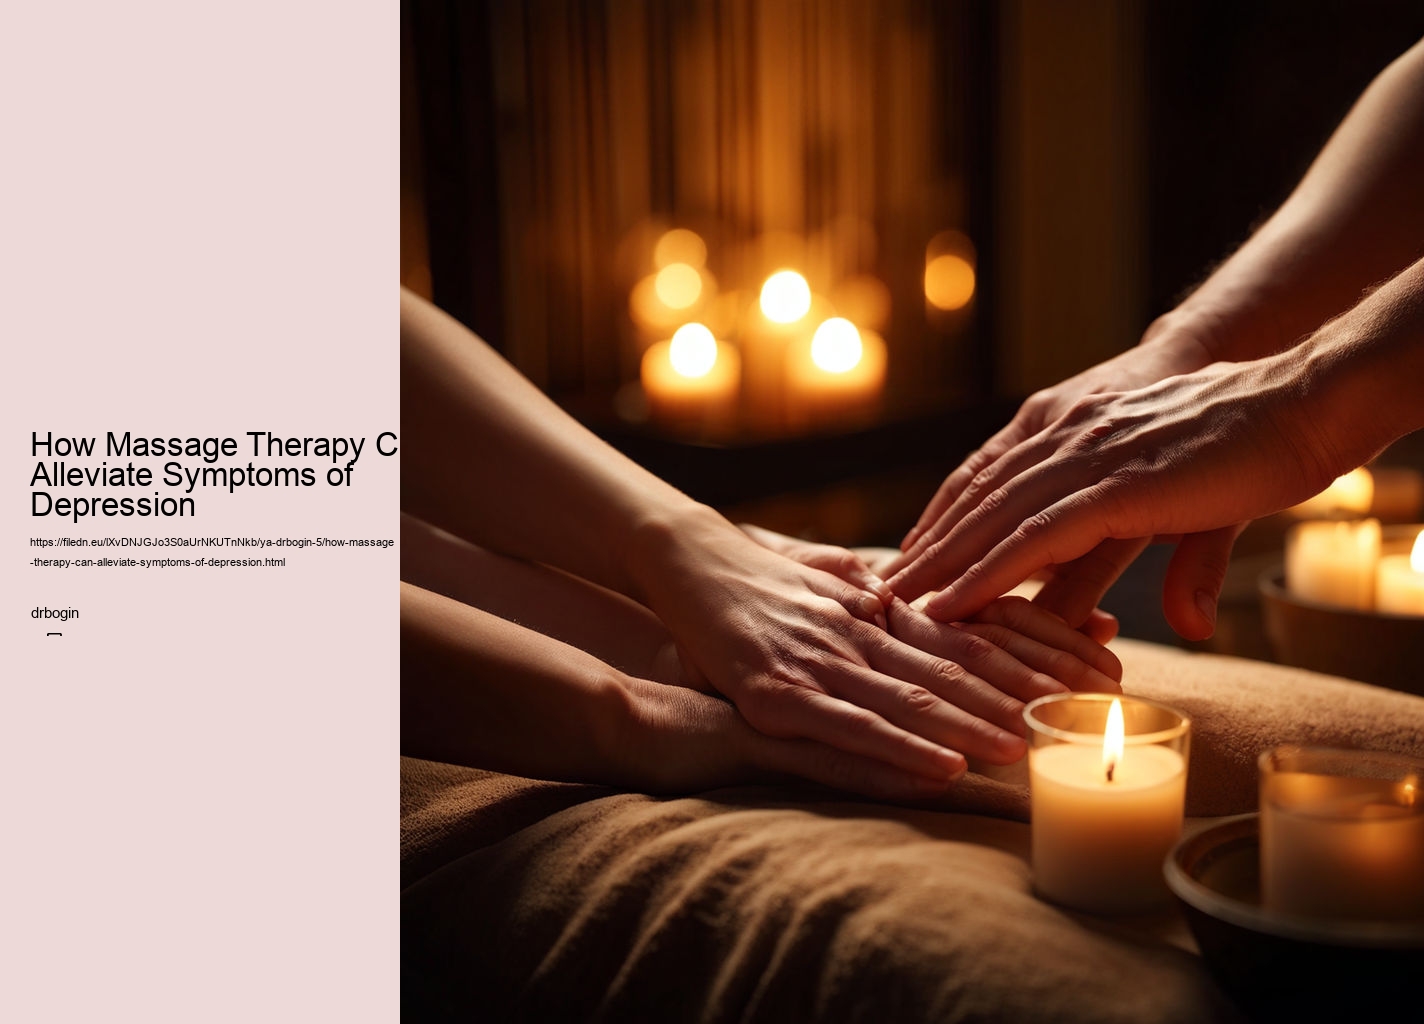 How Massage Therapy Can Alleviate Symptoms of Depression